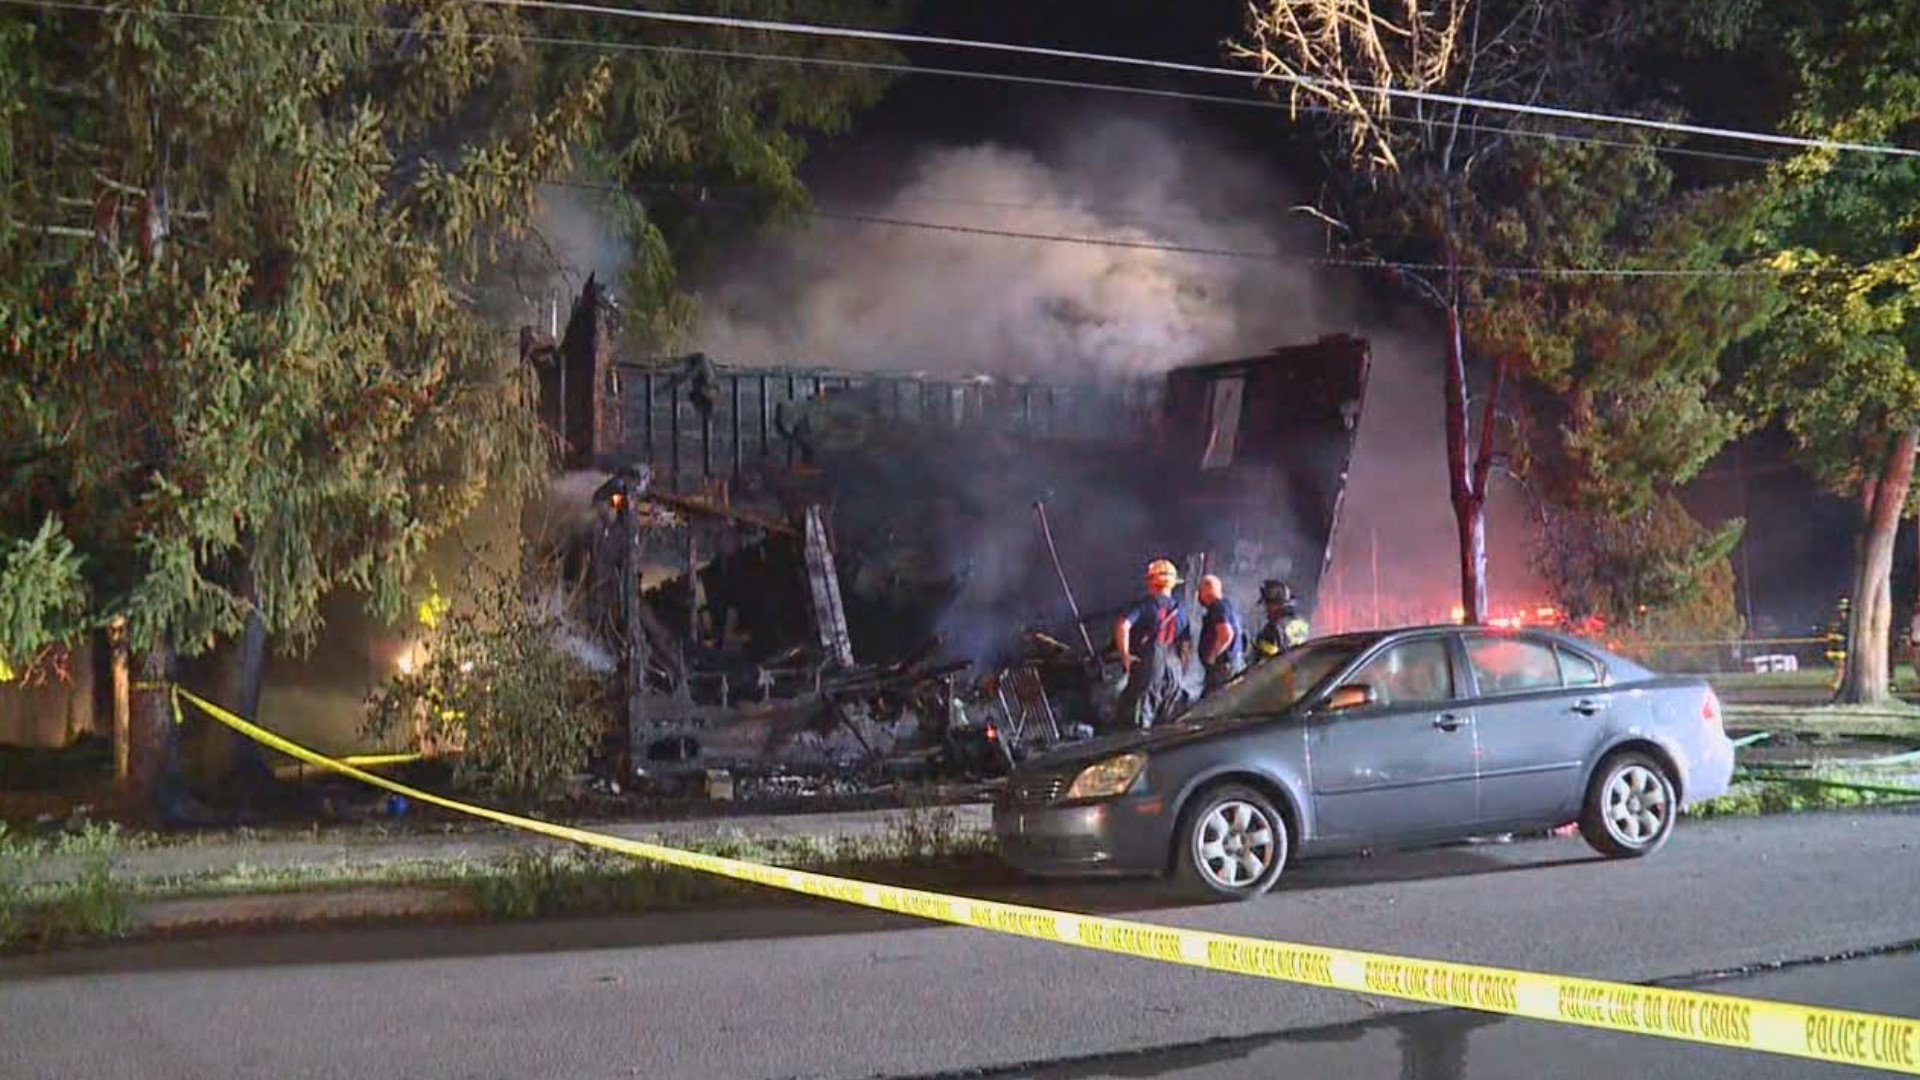 Investigators confirmed that ten people died after a fire early Friday morning in Nescopeck.